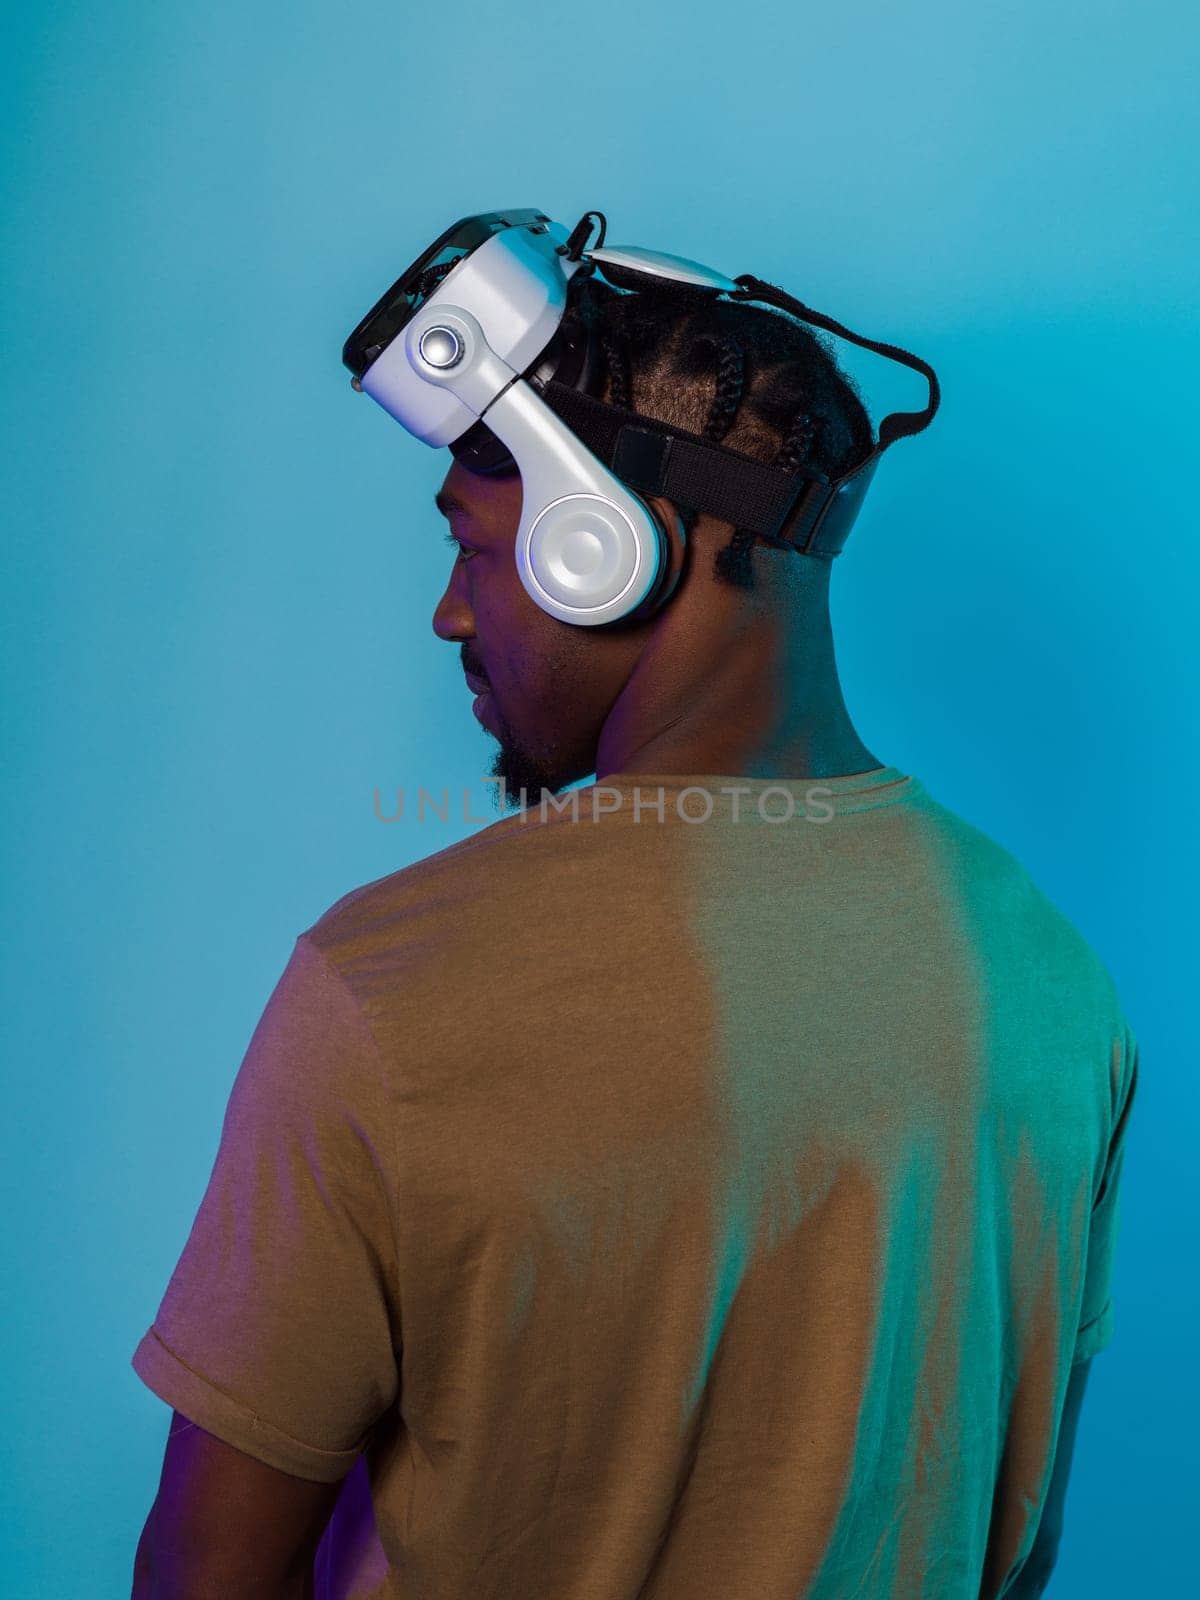 In a futuristic visual, an African American man stands isolated against a striking blue backdrop, adorned with VR glasses that transport him into a cutting-edge virtual reality experience, merging technology and innovation in a contemporary display by dotshock